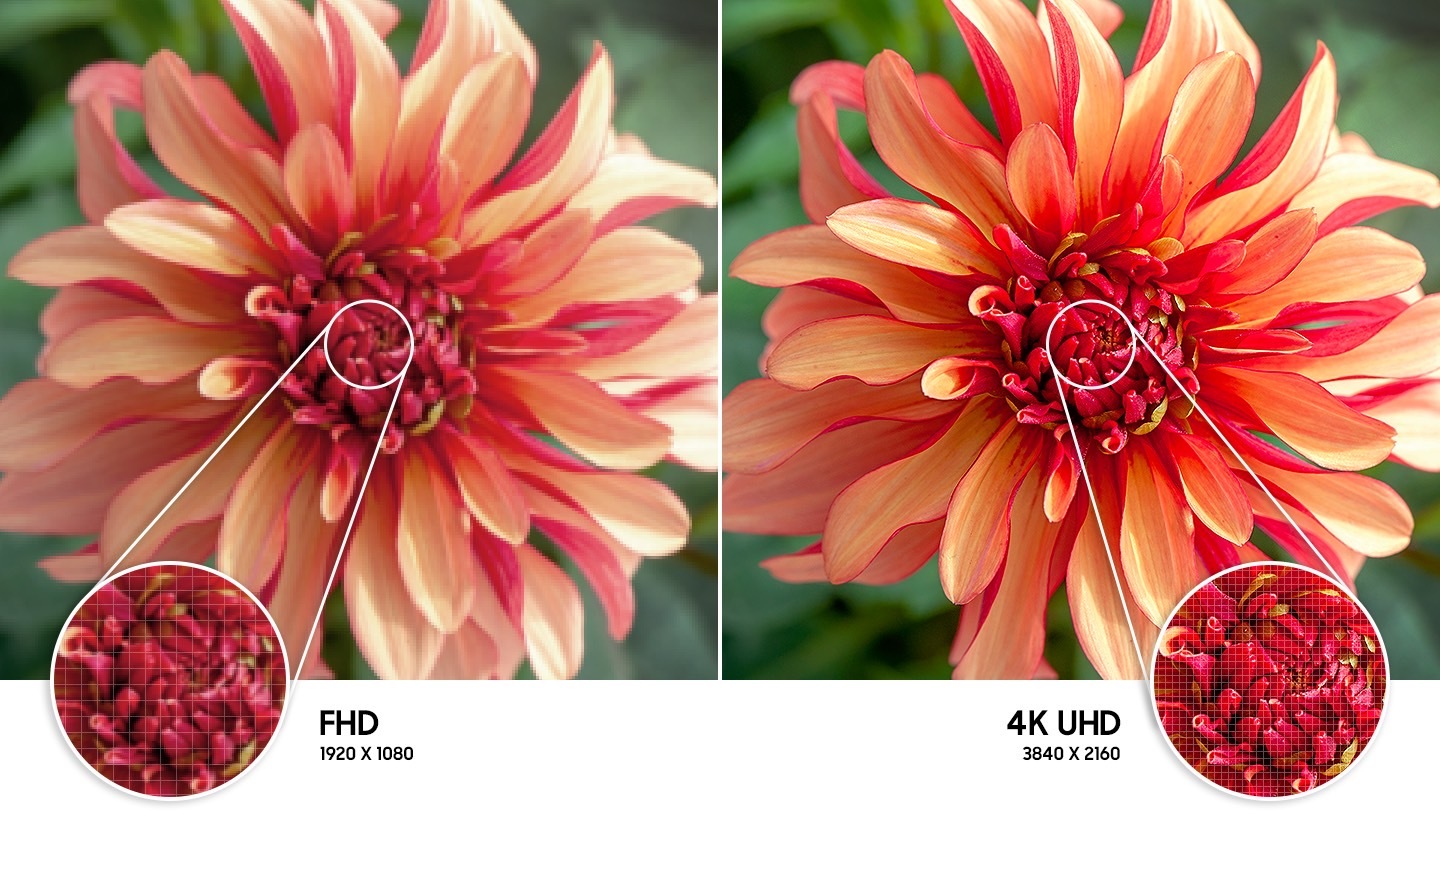 gr-feature-feel-the-reality-of-4k-uhd-resolution-404839995 (1440×892)